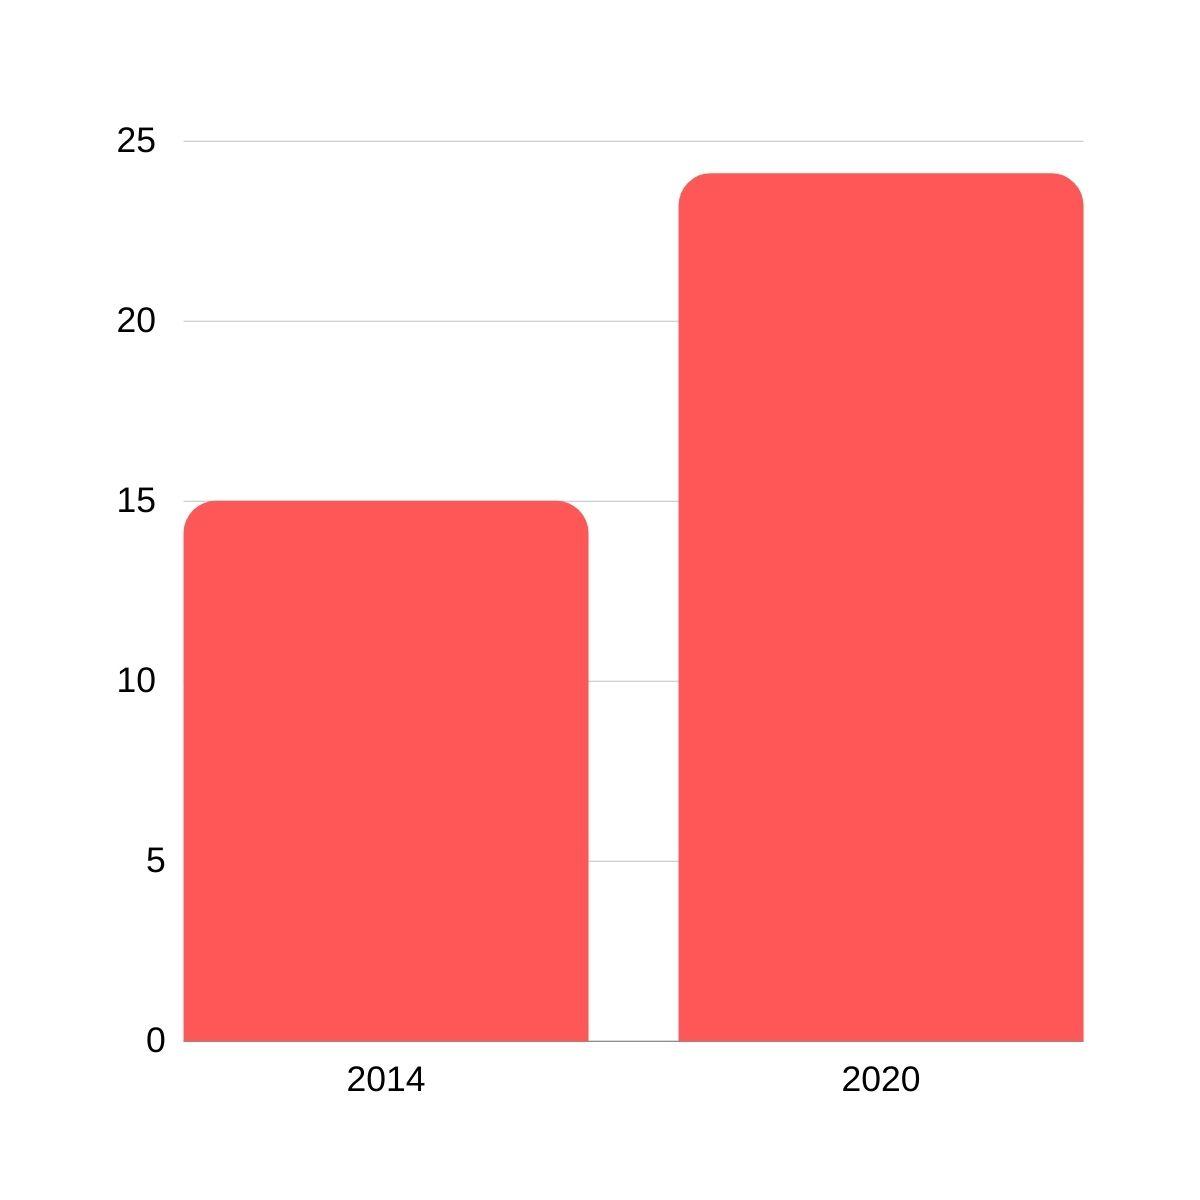 Women in tech at Facebook from 2014-2020 (as a percentage)